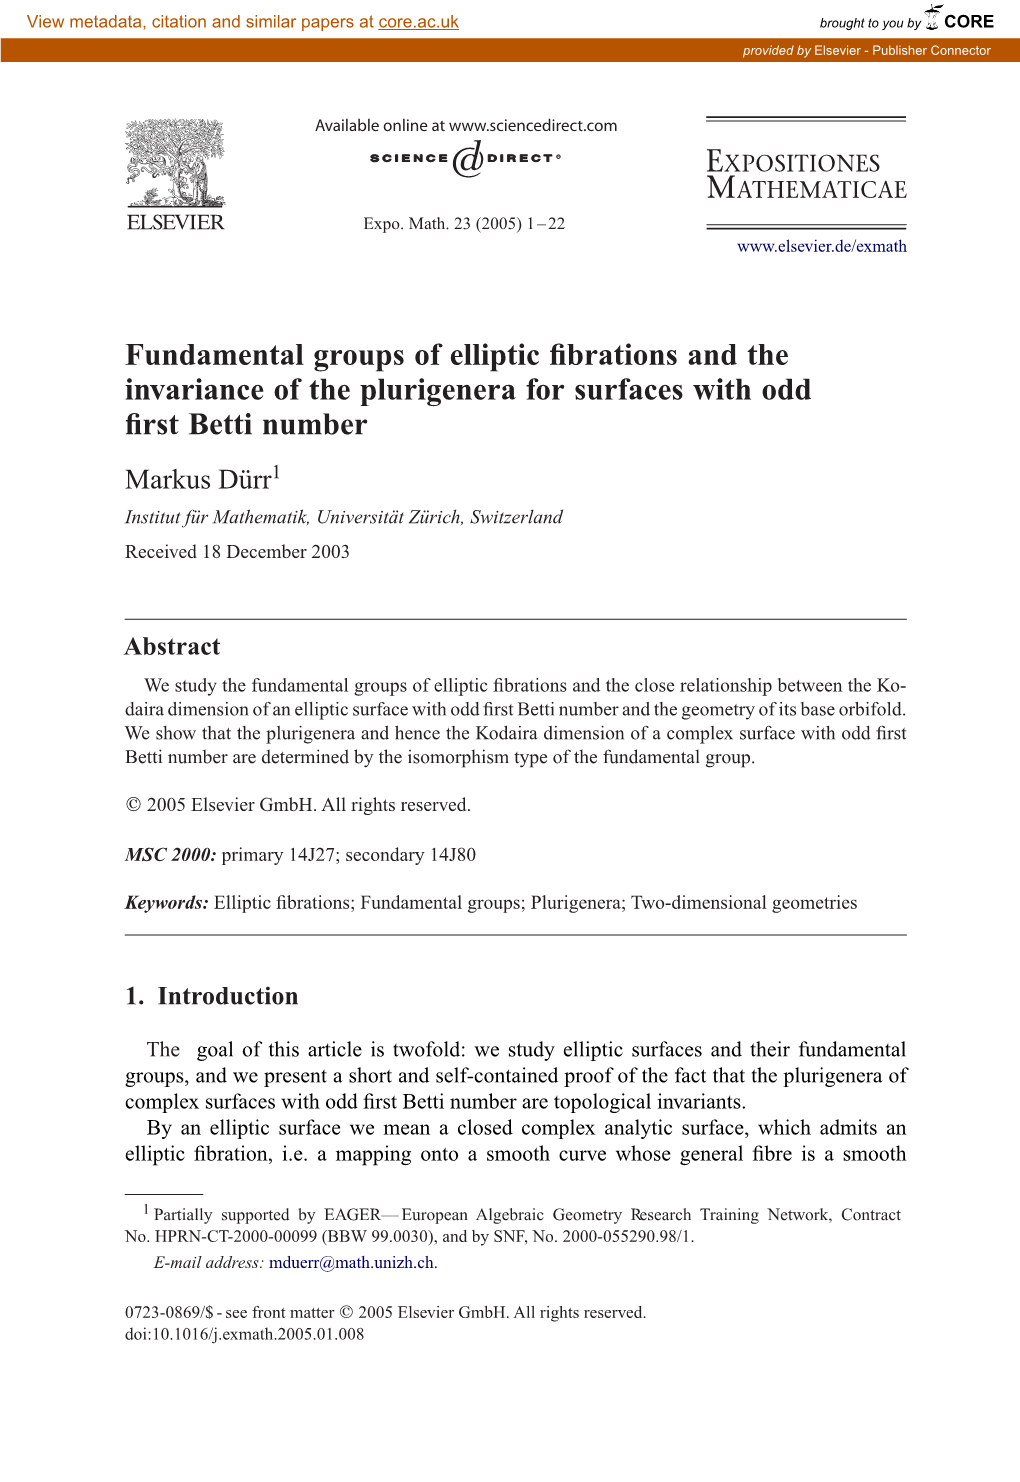 Fundamental Groups of Elliptic Fibrations and the Invariance of The